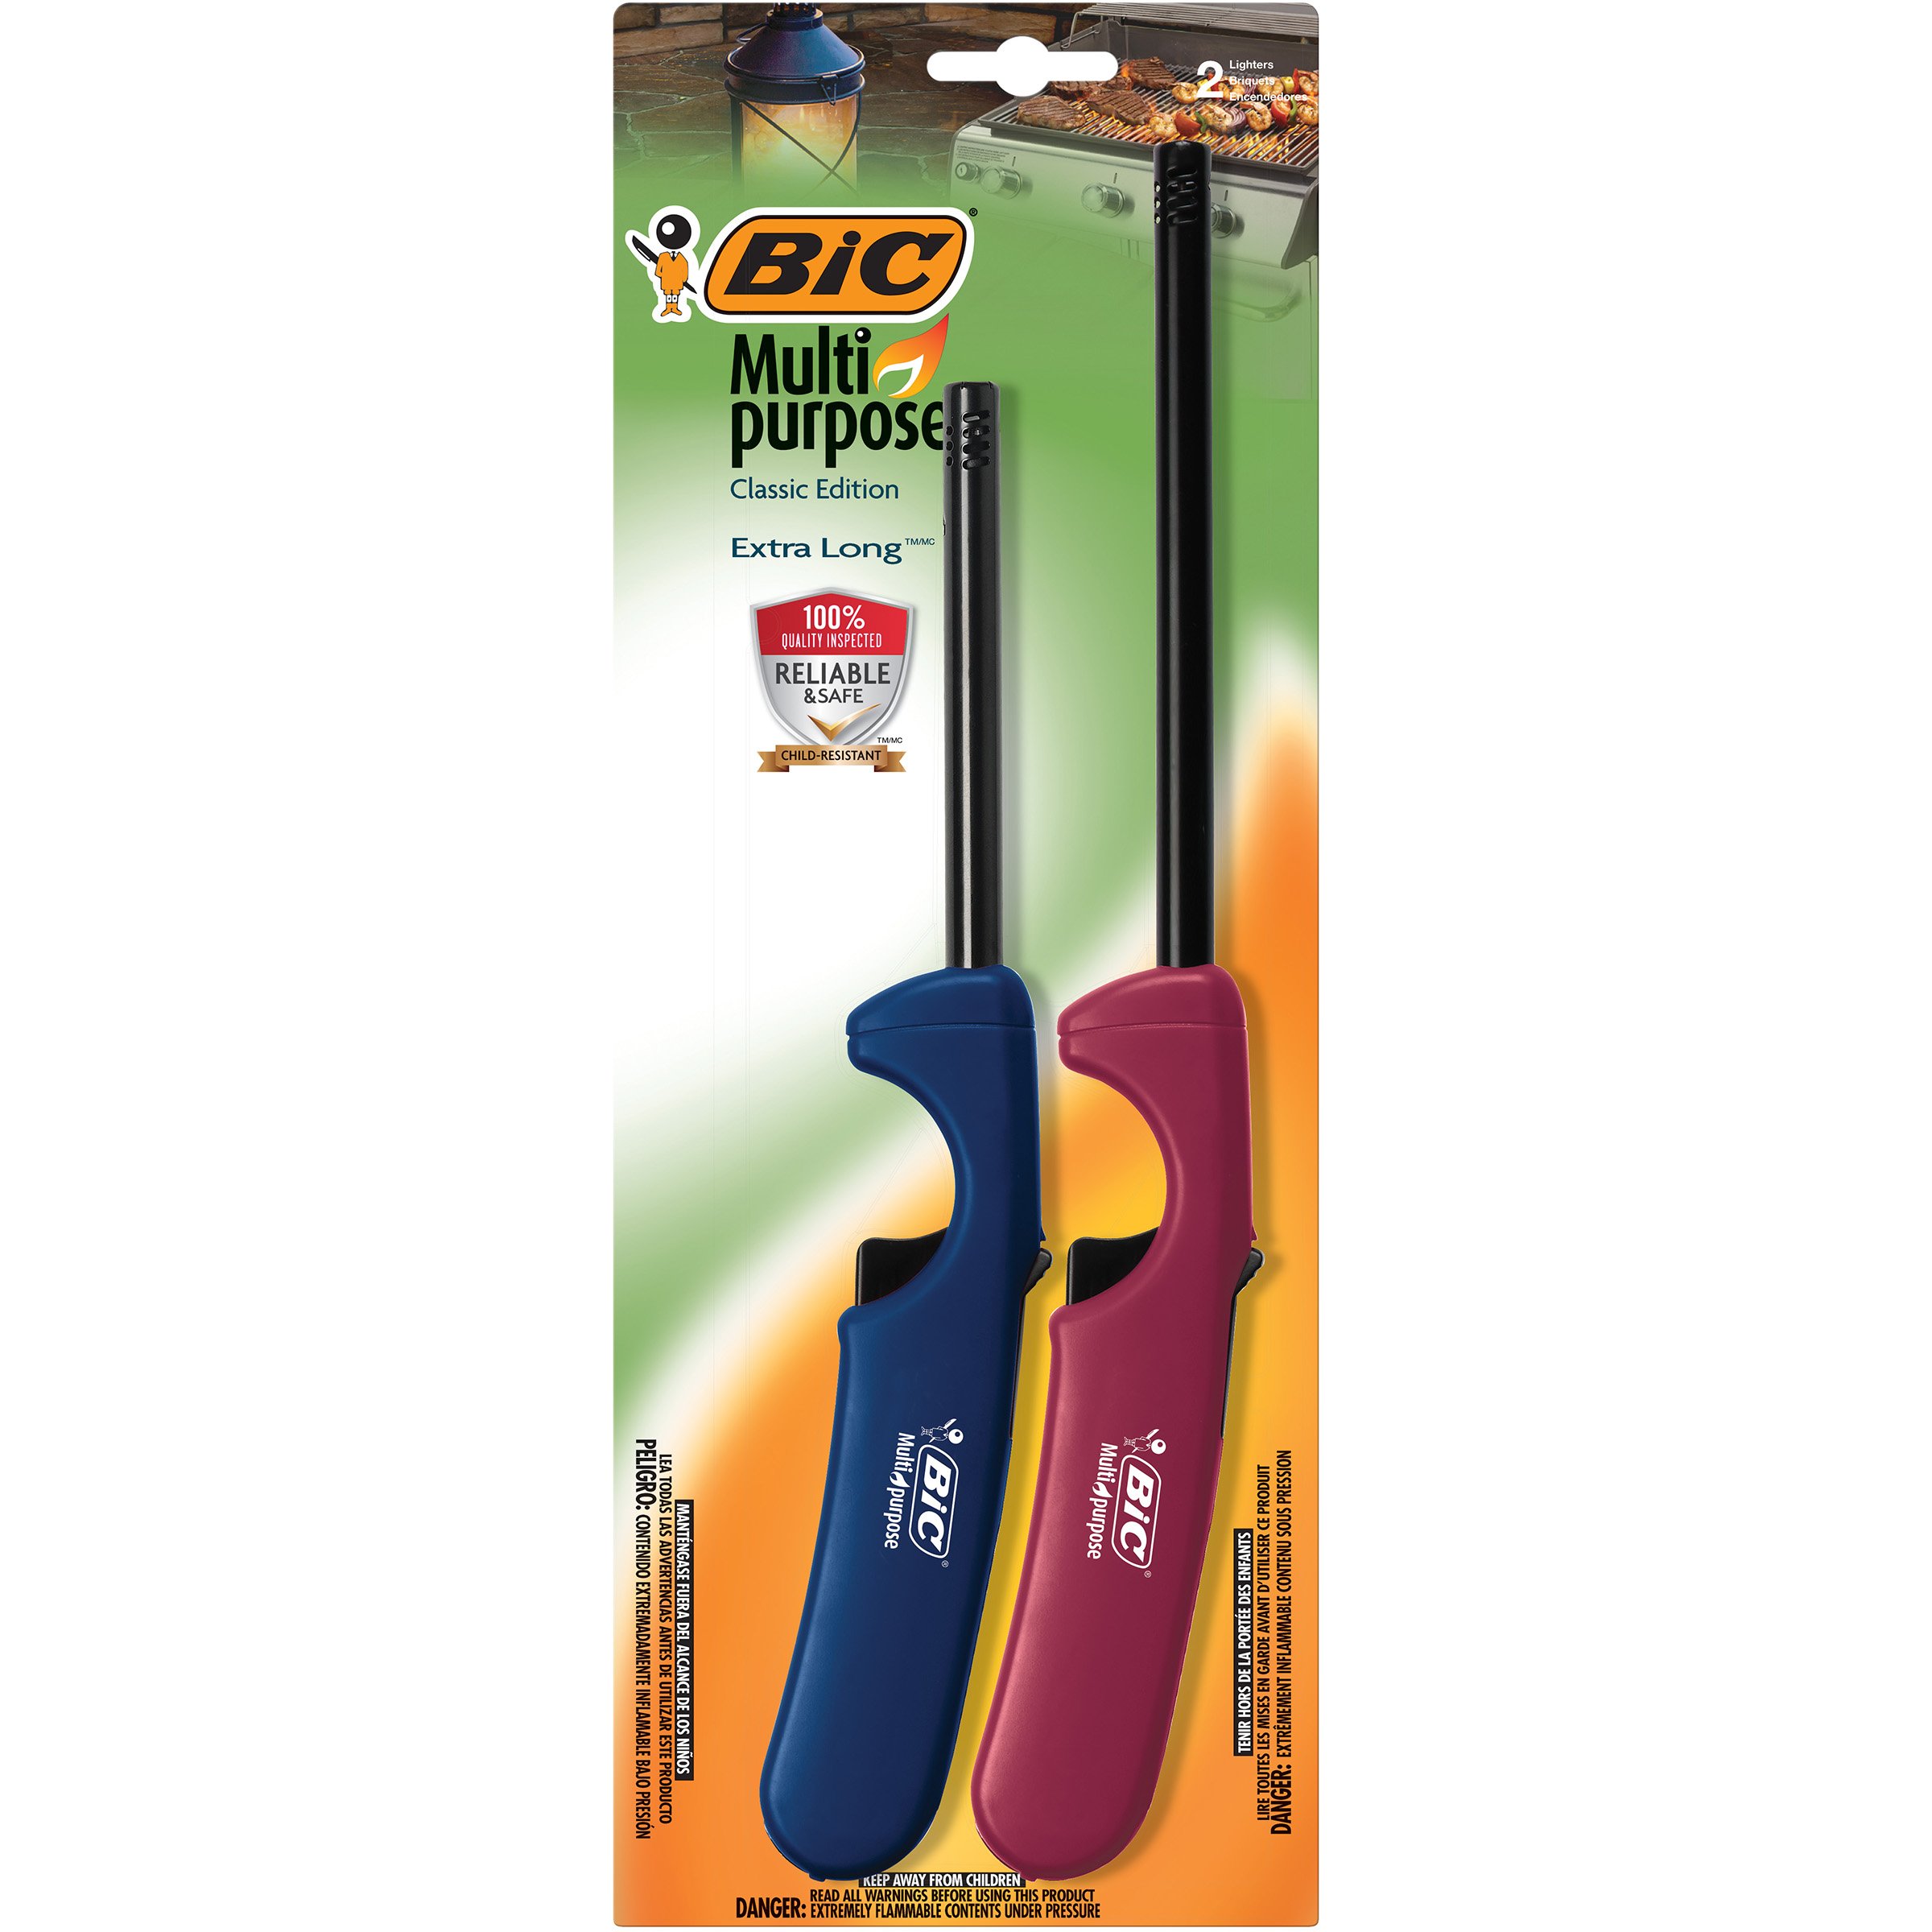 Bic Multi Purpose Classic And Extra Long Lighters Shop Lighters